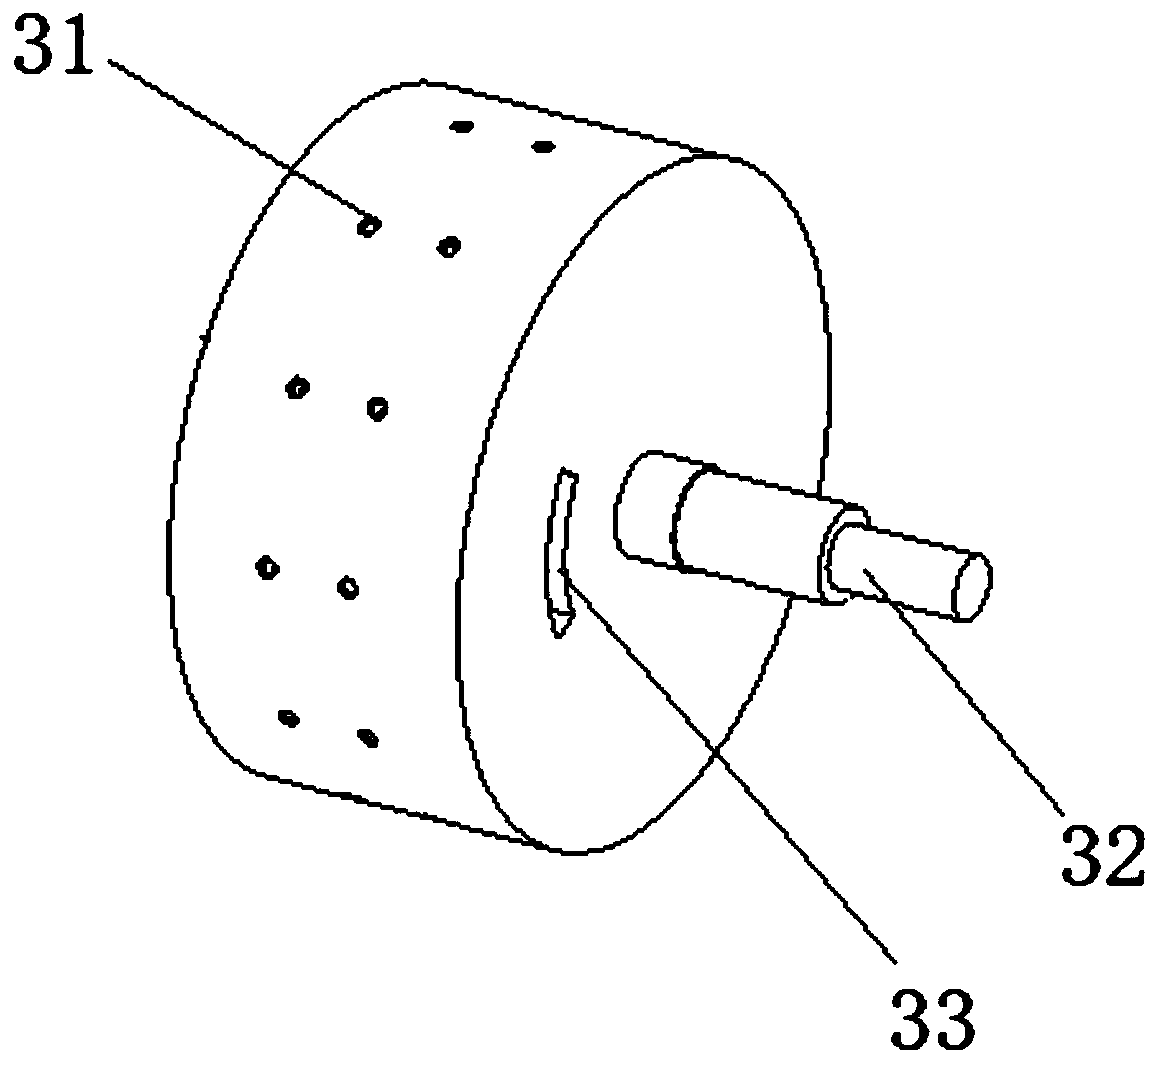 A spherical seed dual-purpose precision metering device